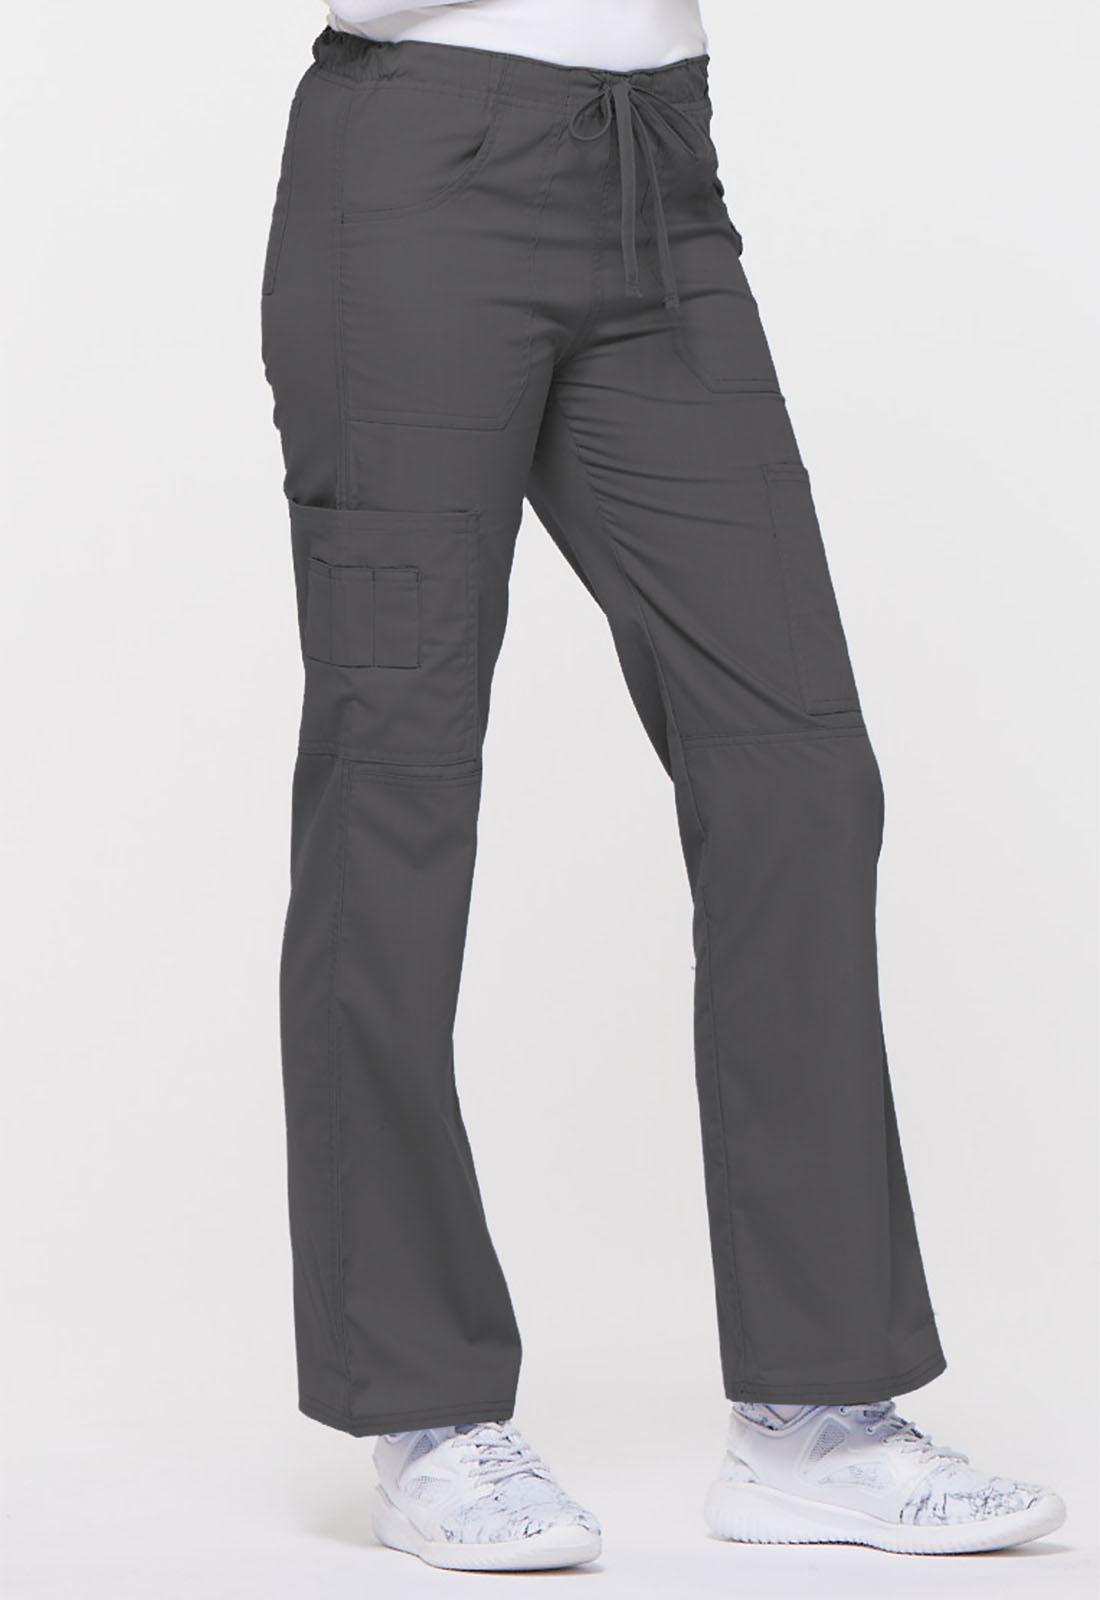 Dickies EDS Signature Drawstring Cargo Pant in Pewter from Dickies Medical